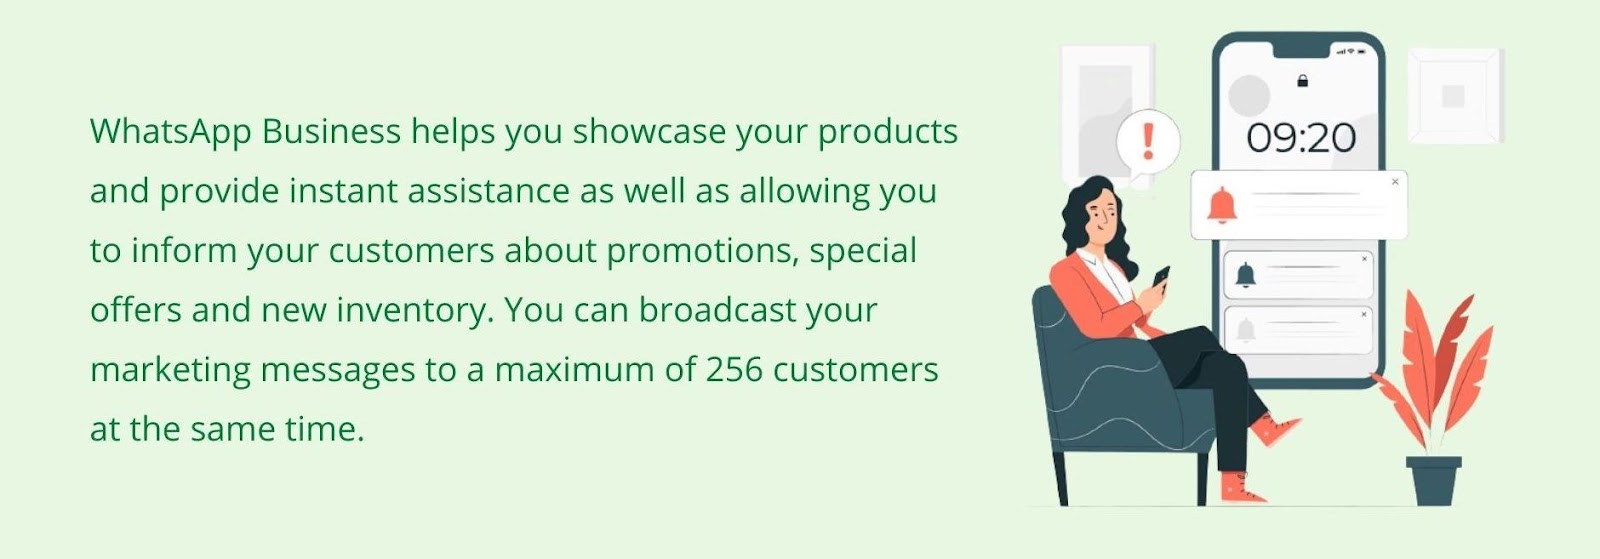 WhatsApp Business helps you showcase your products and provide instant assistance, as well as allows you to inform your customers about promotions, special offers, and new inventory. You can broadcast your marketing messages to a maximum of 256 customers simultaneously.